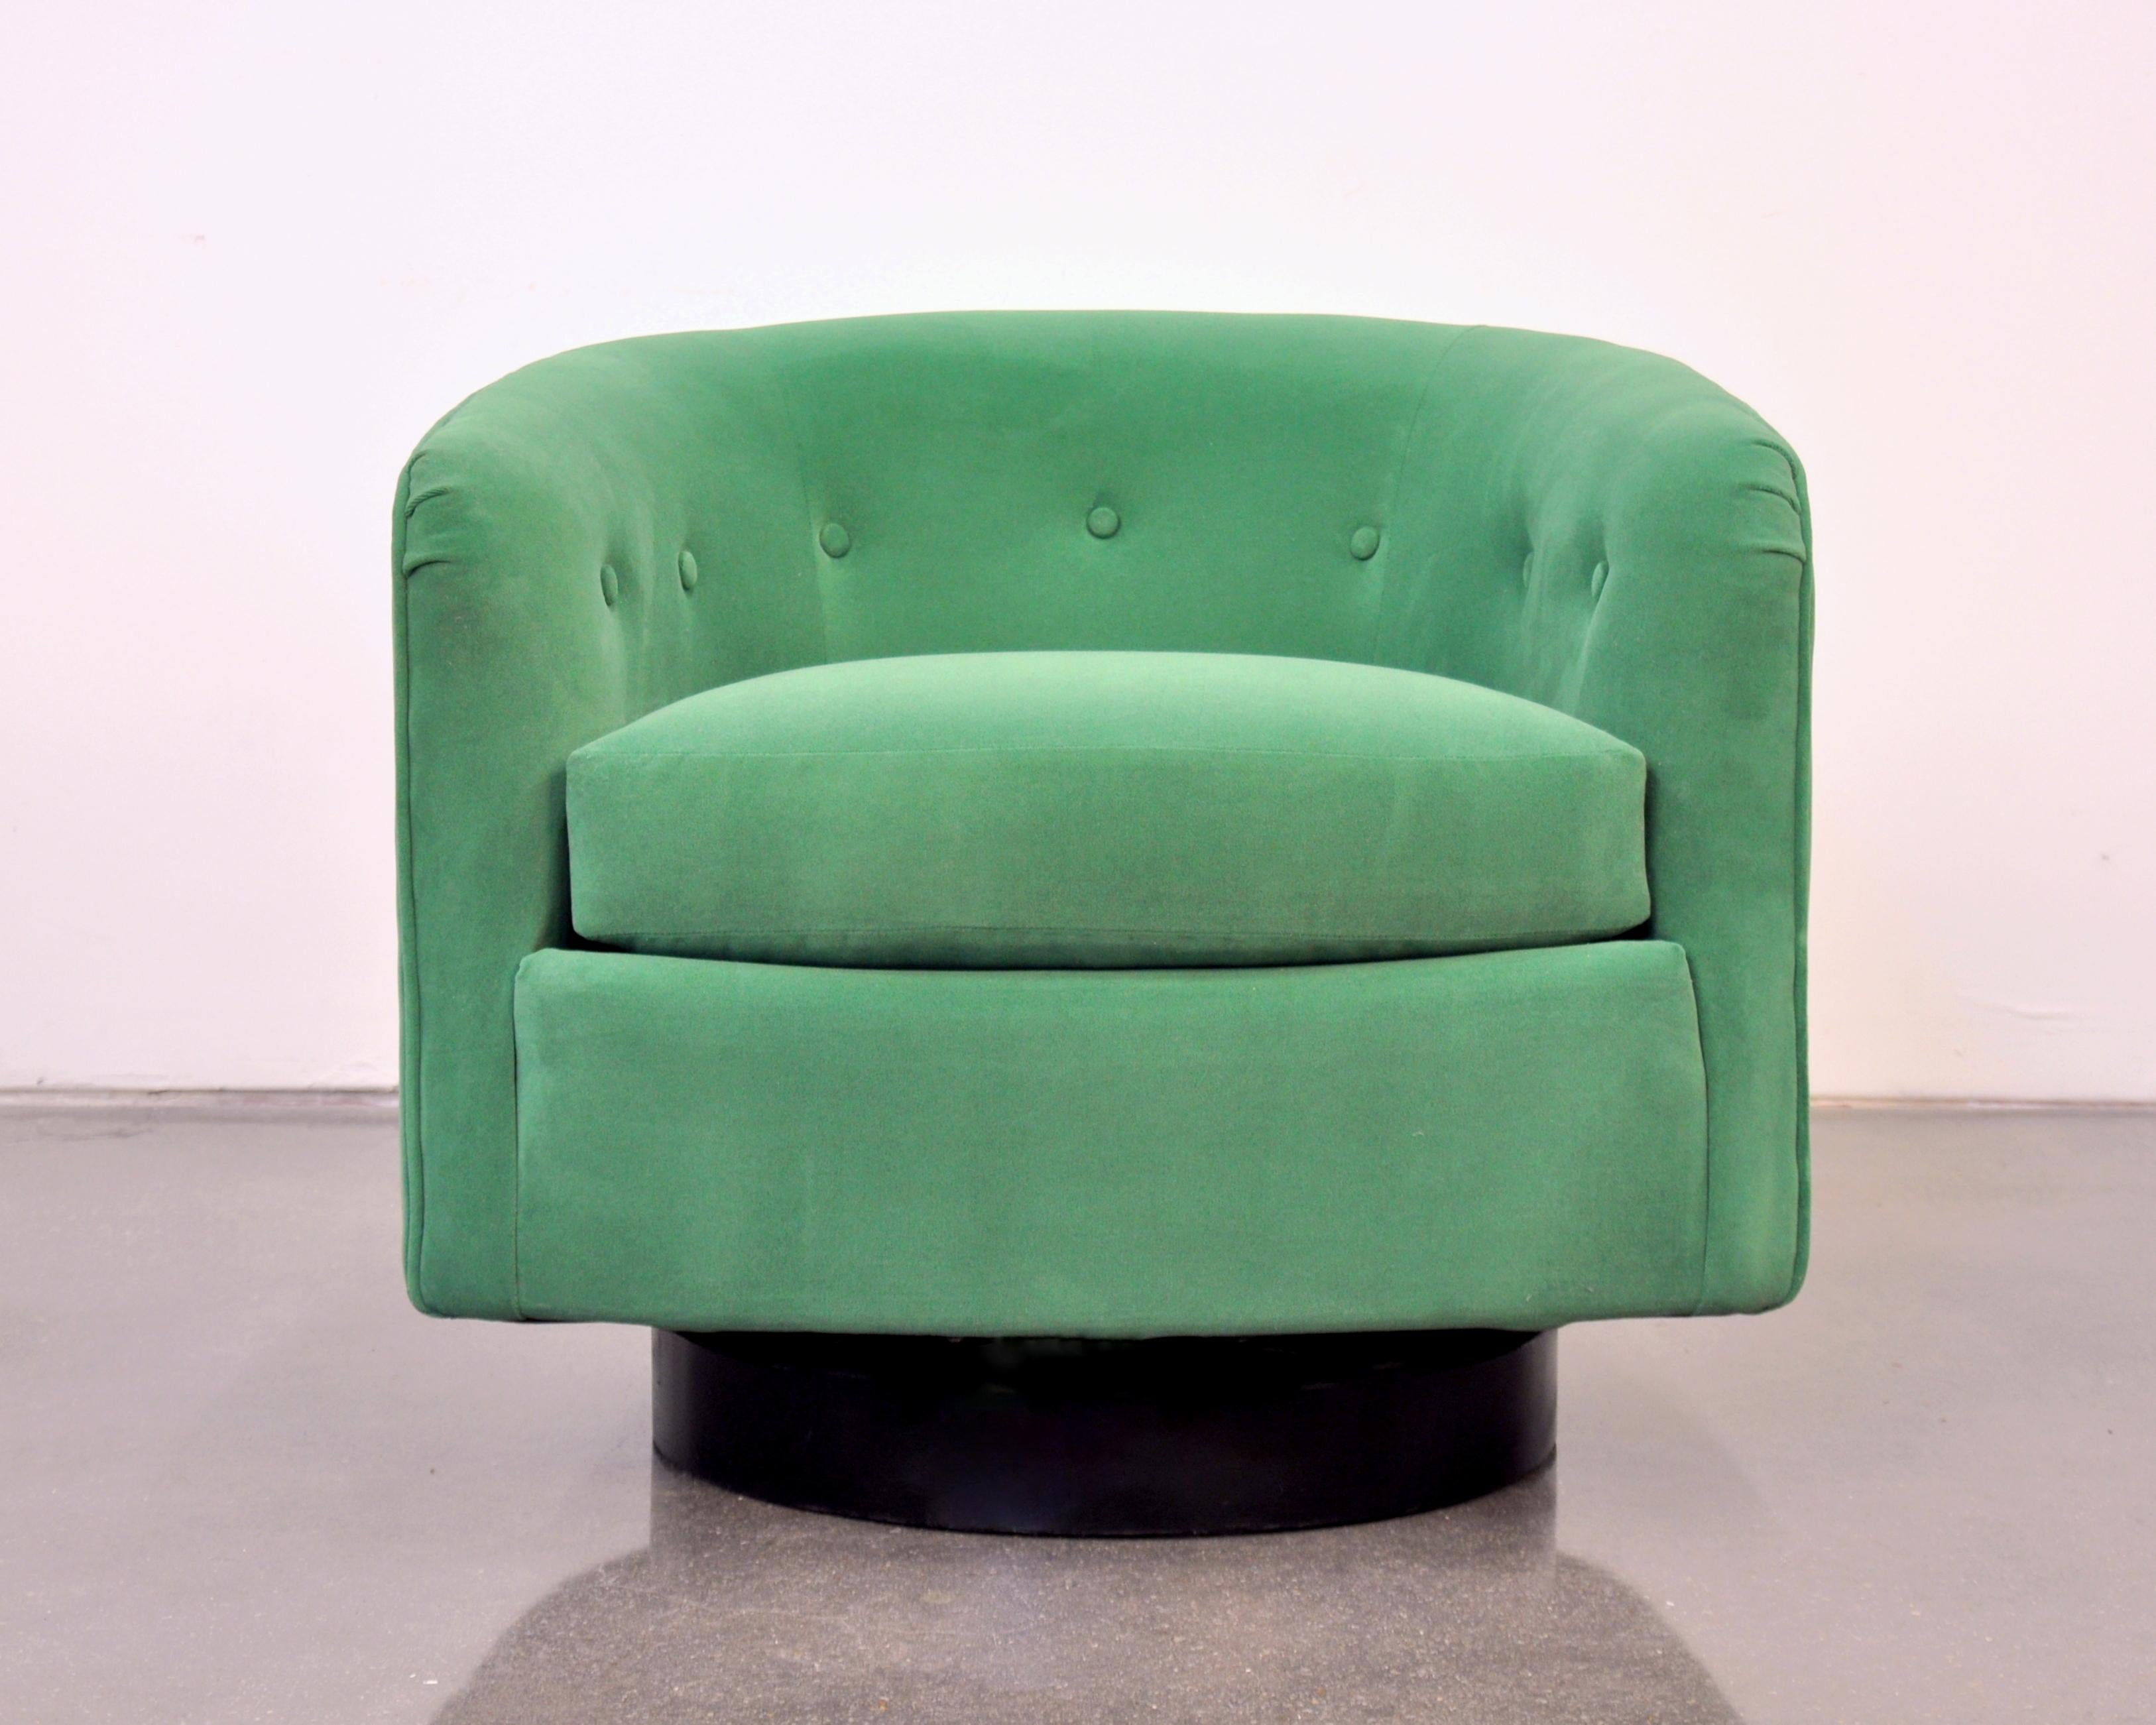 A 1960s vintage Mid-Century Modern tufted barrel back club or tub chair. The armchair has been fully restored and reupholstered in a gorgeous sage moss jewel tone green velvet. It features a round wood base with black finish and swiveling mechanism.